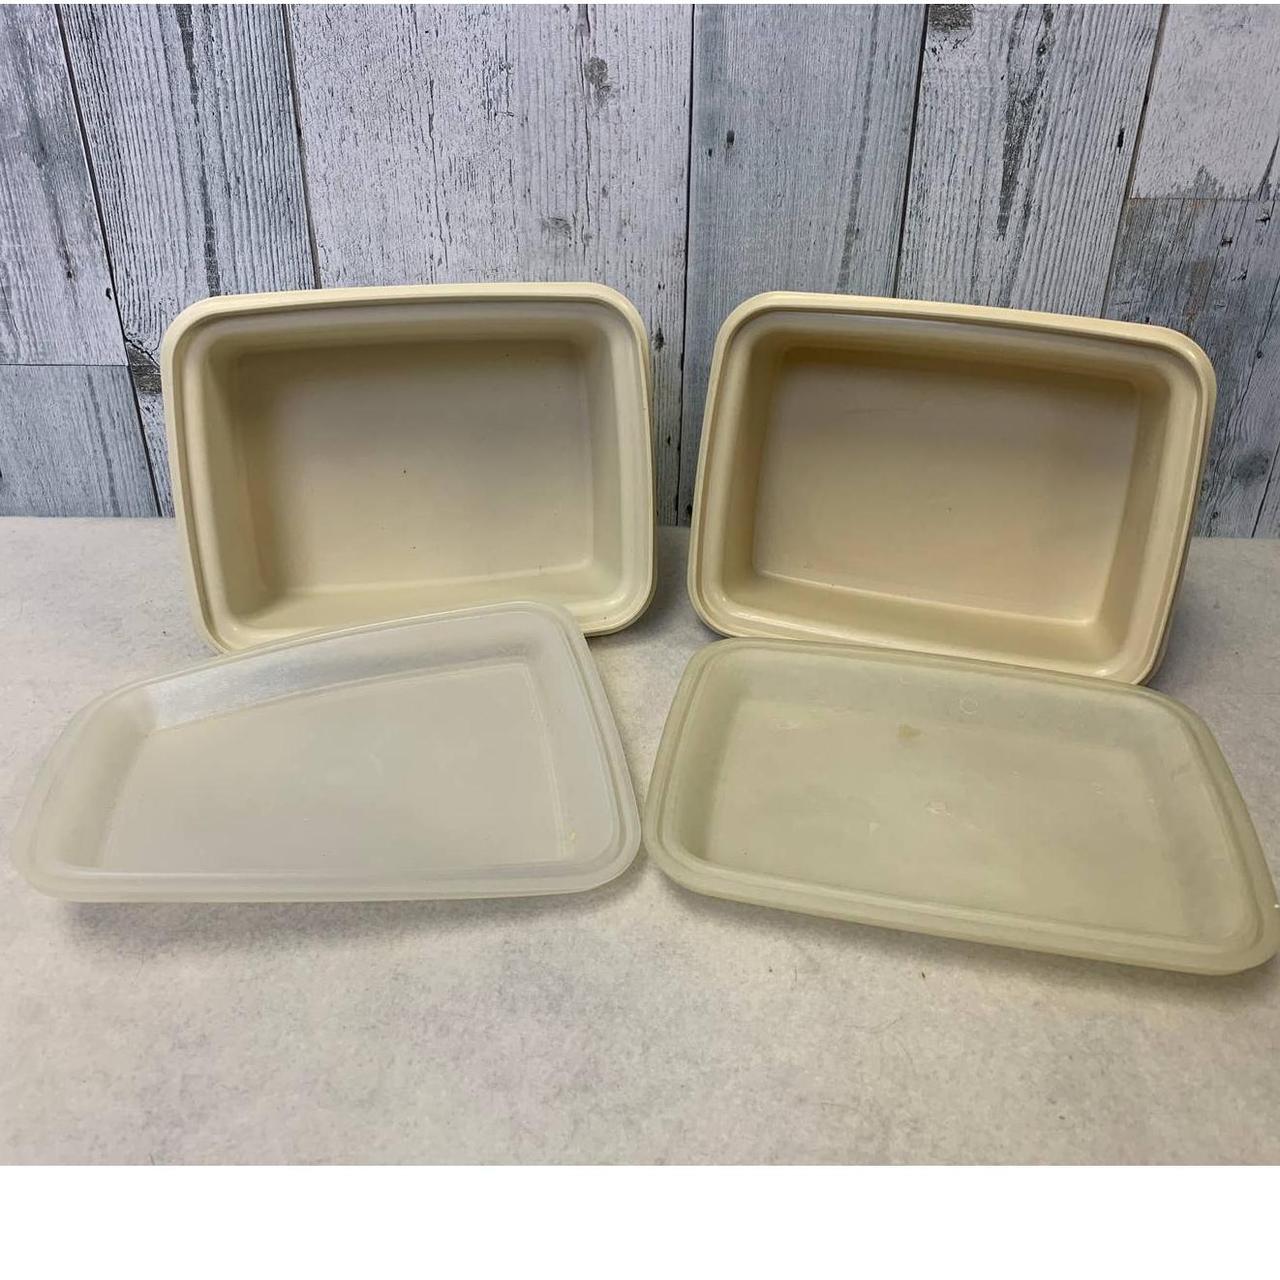 2 Vintage Tupperware Flat Bottom Canister Scoops - #1452-2/1452-5